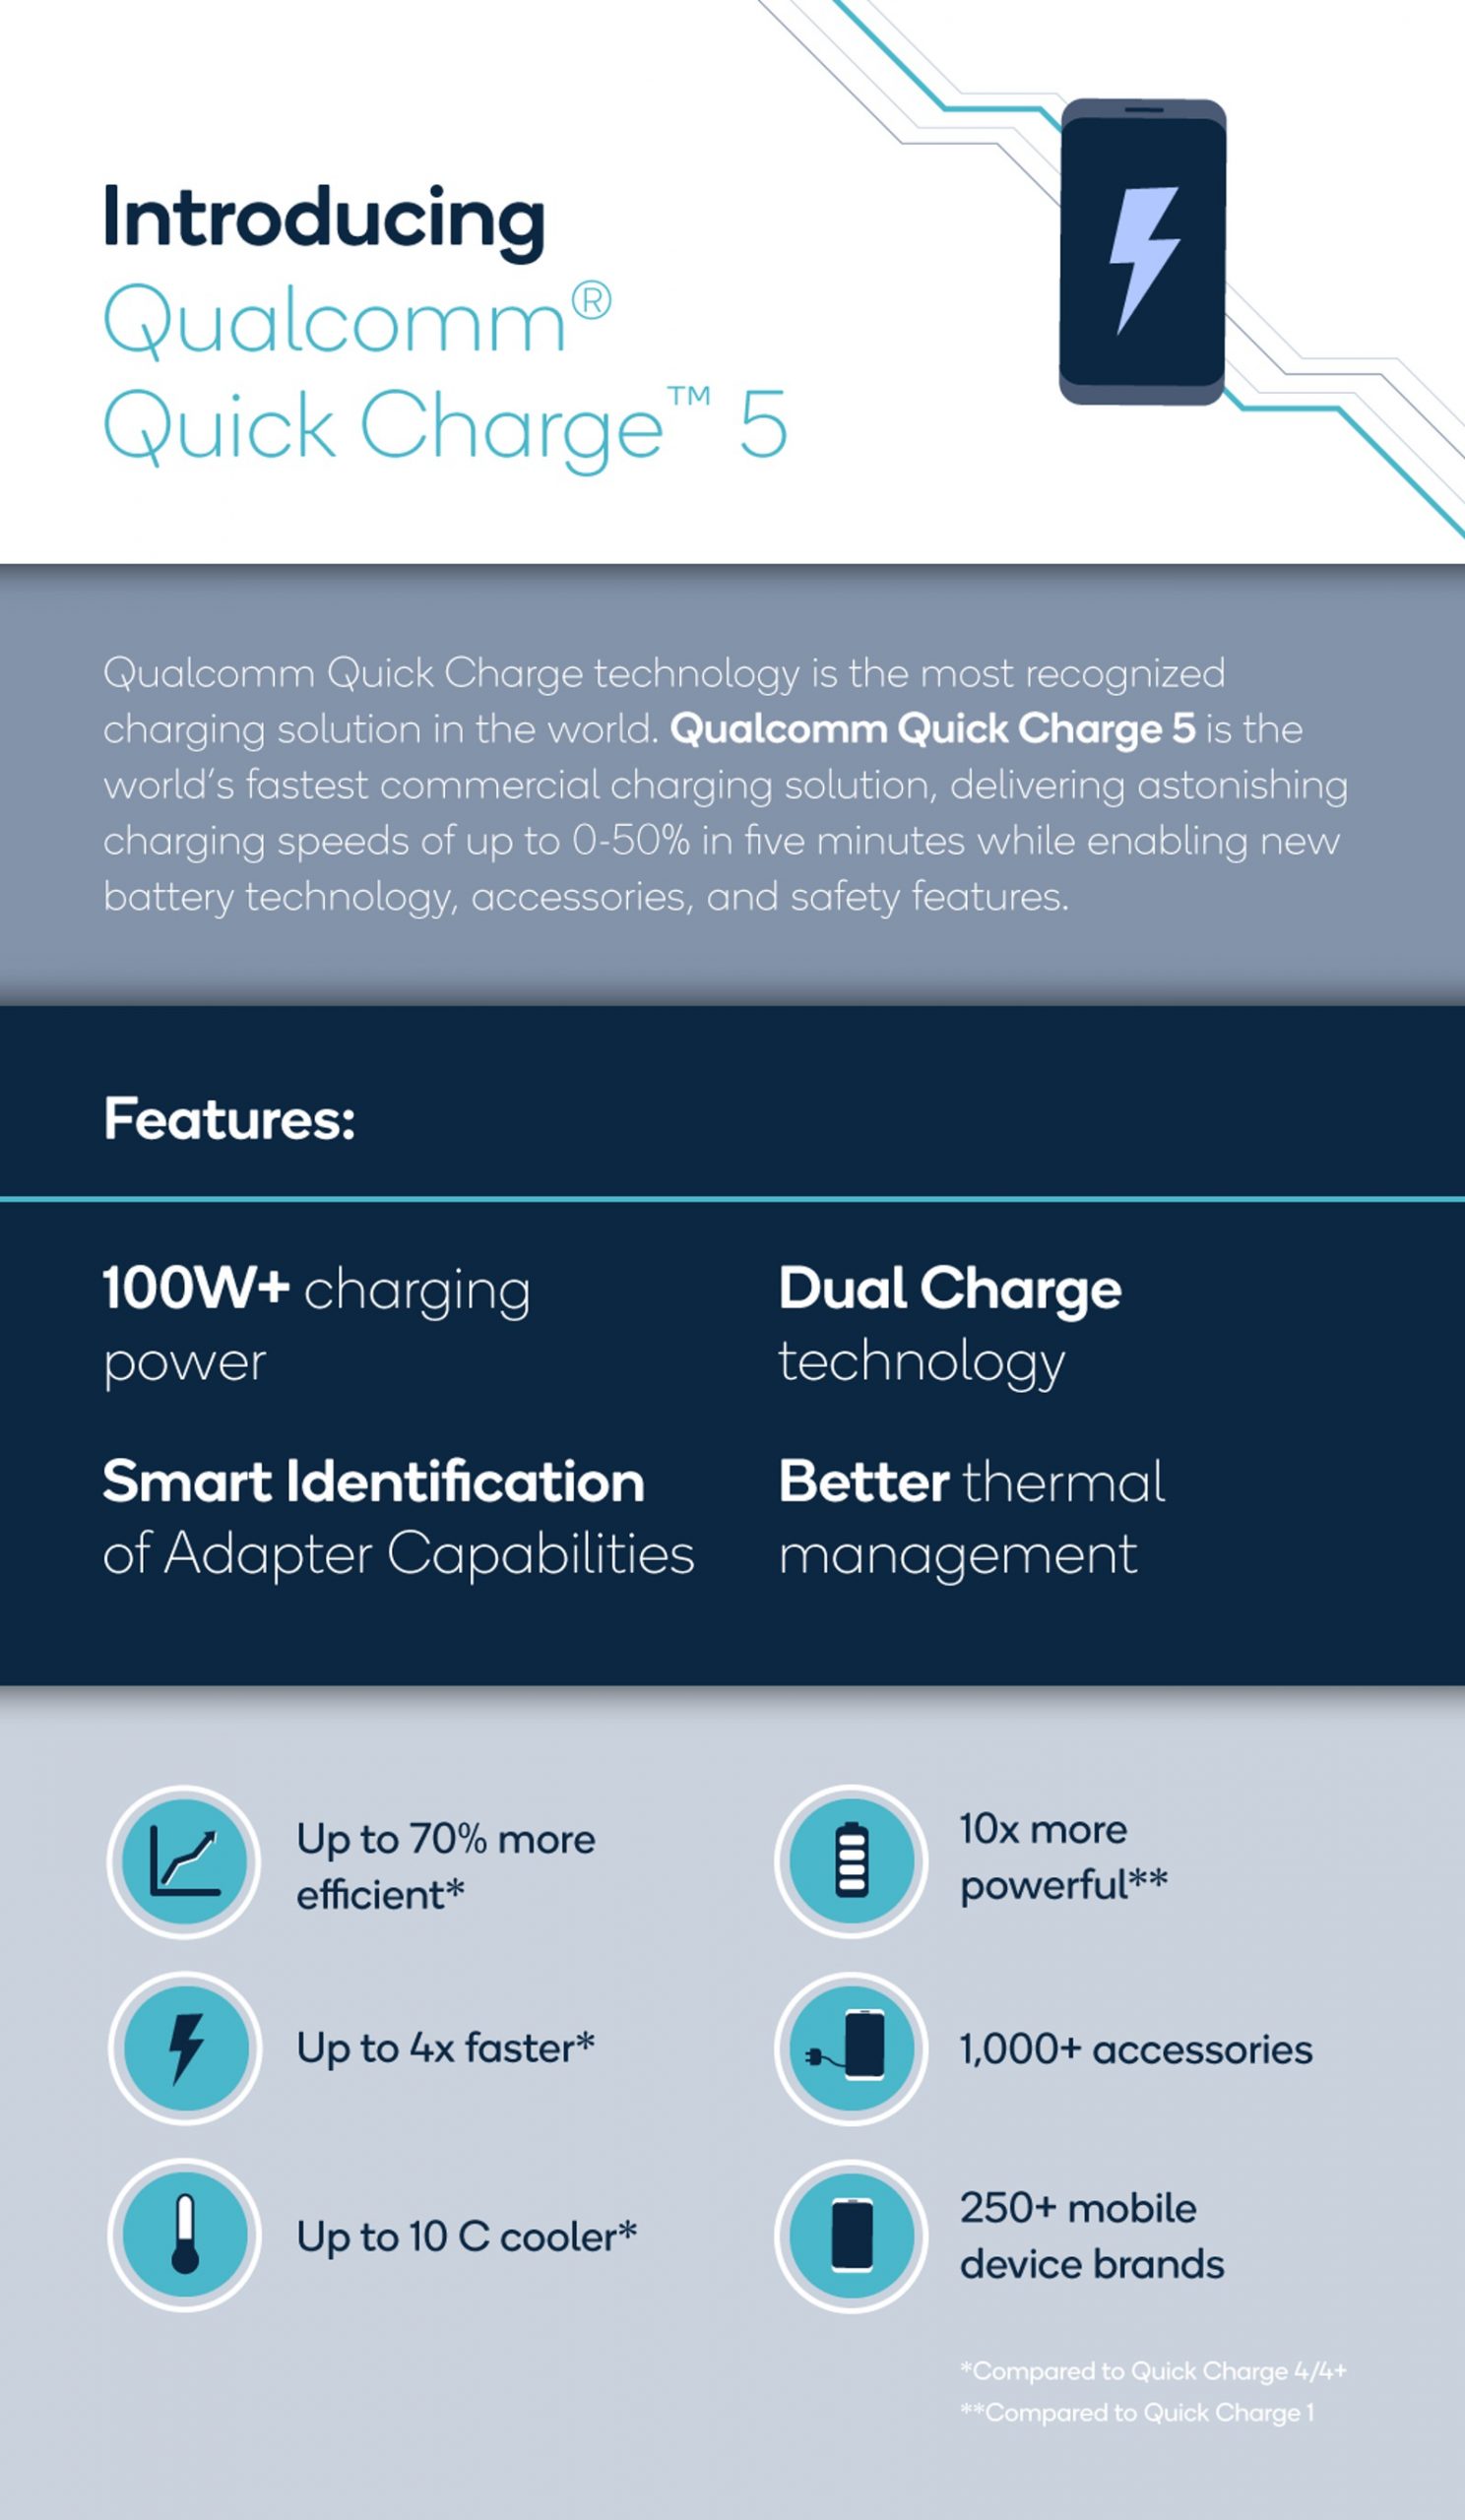 Qc quickcharge5 infographic final v2